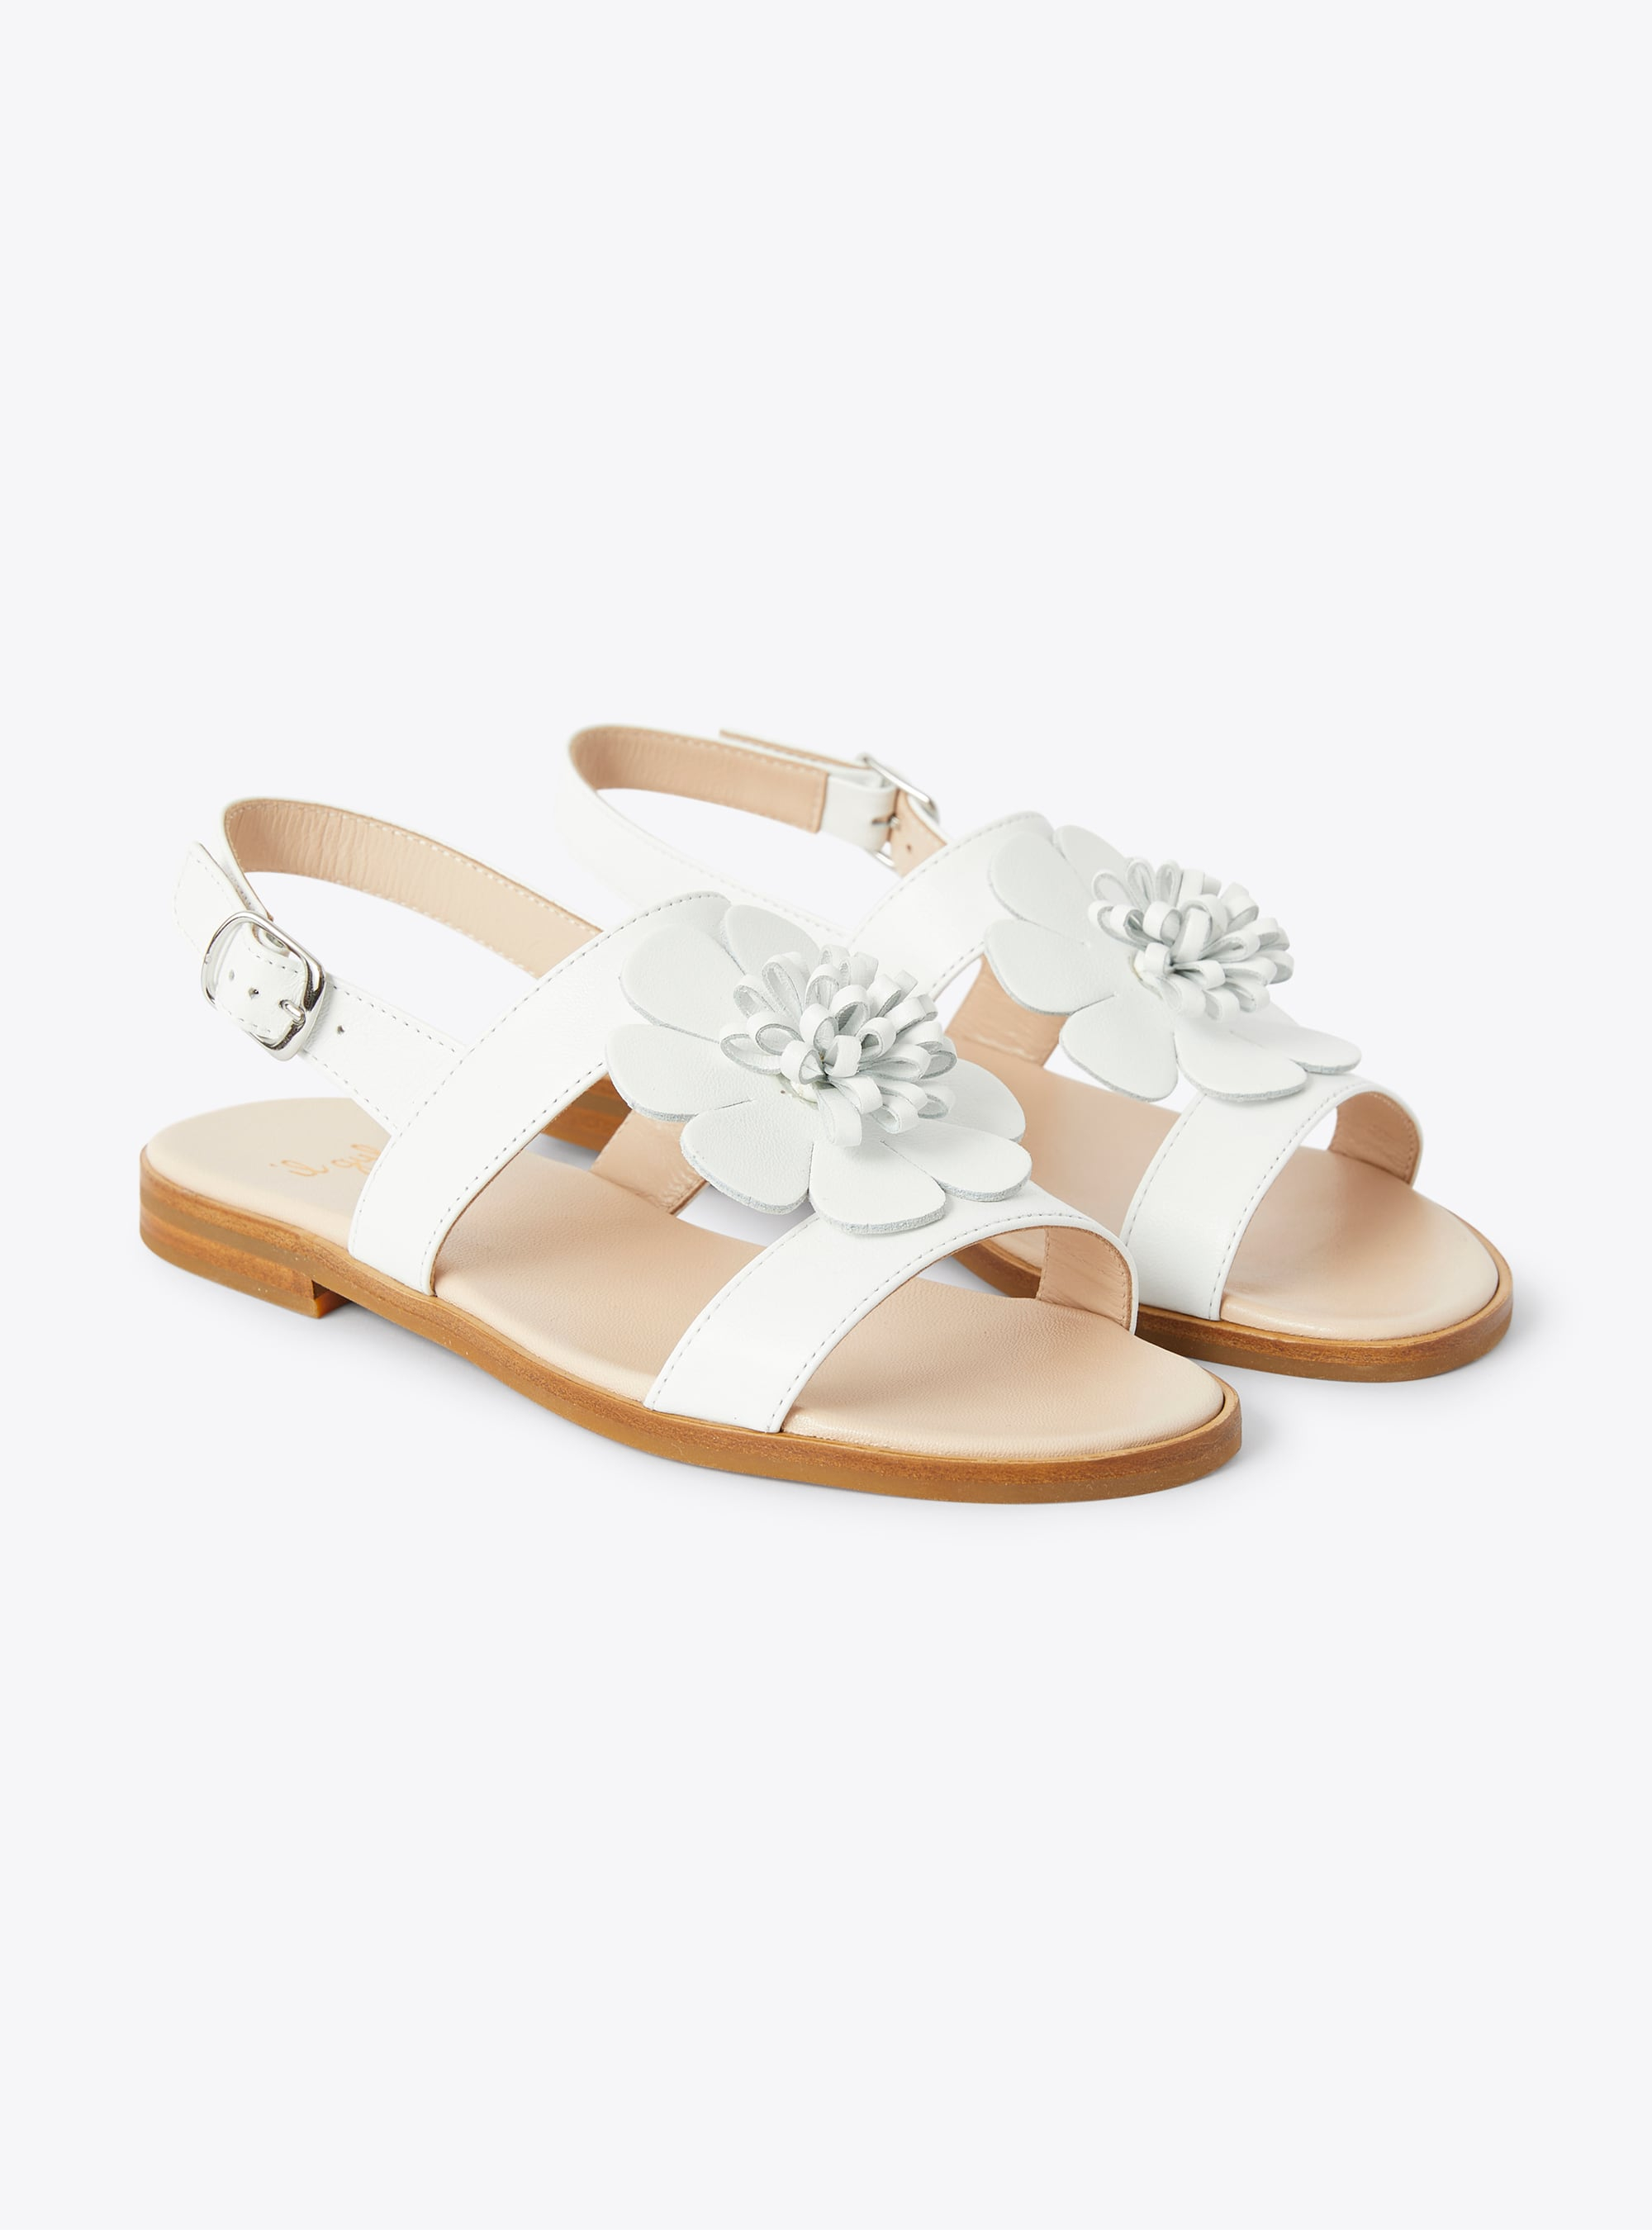 Leather sandal with flower embellishment - Shoes - Il Gufo